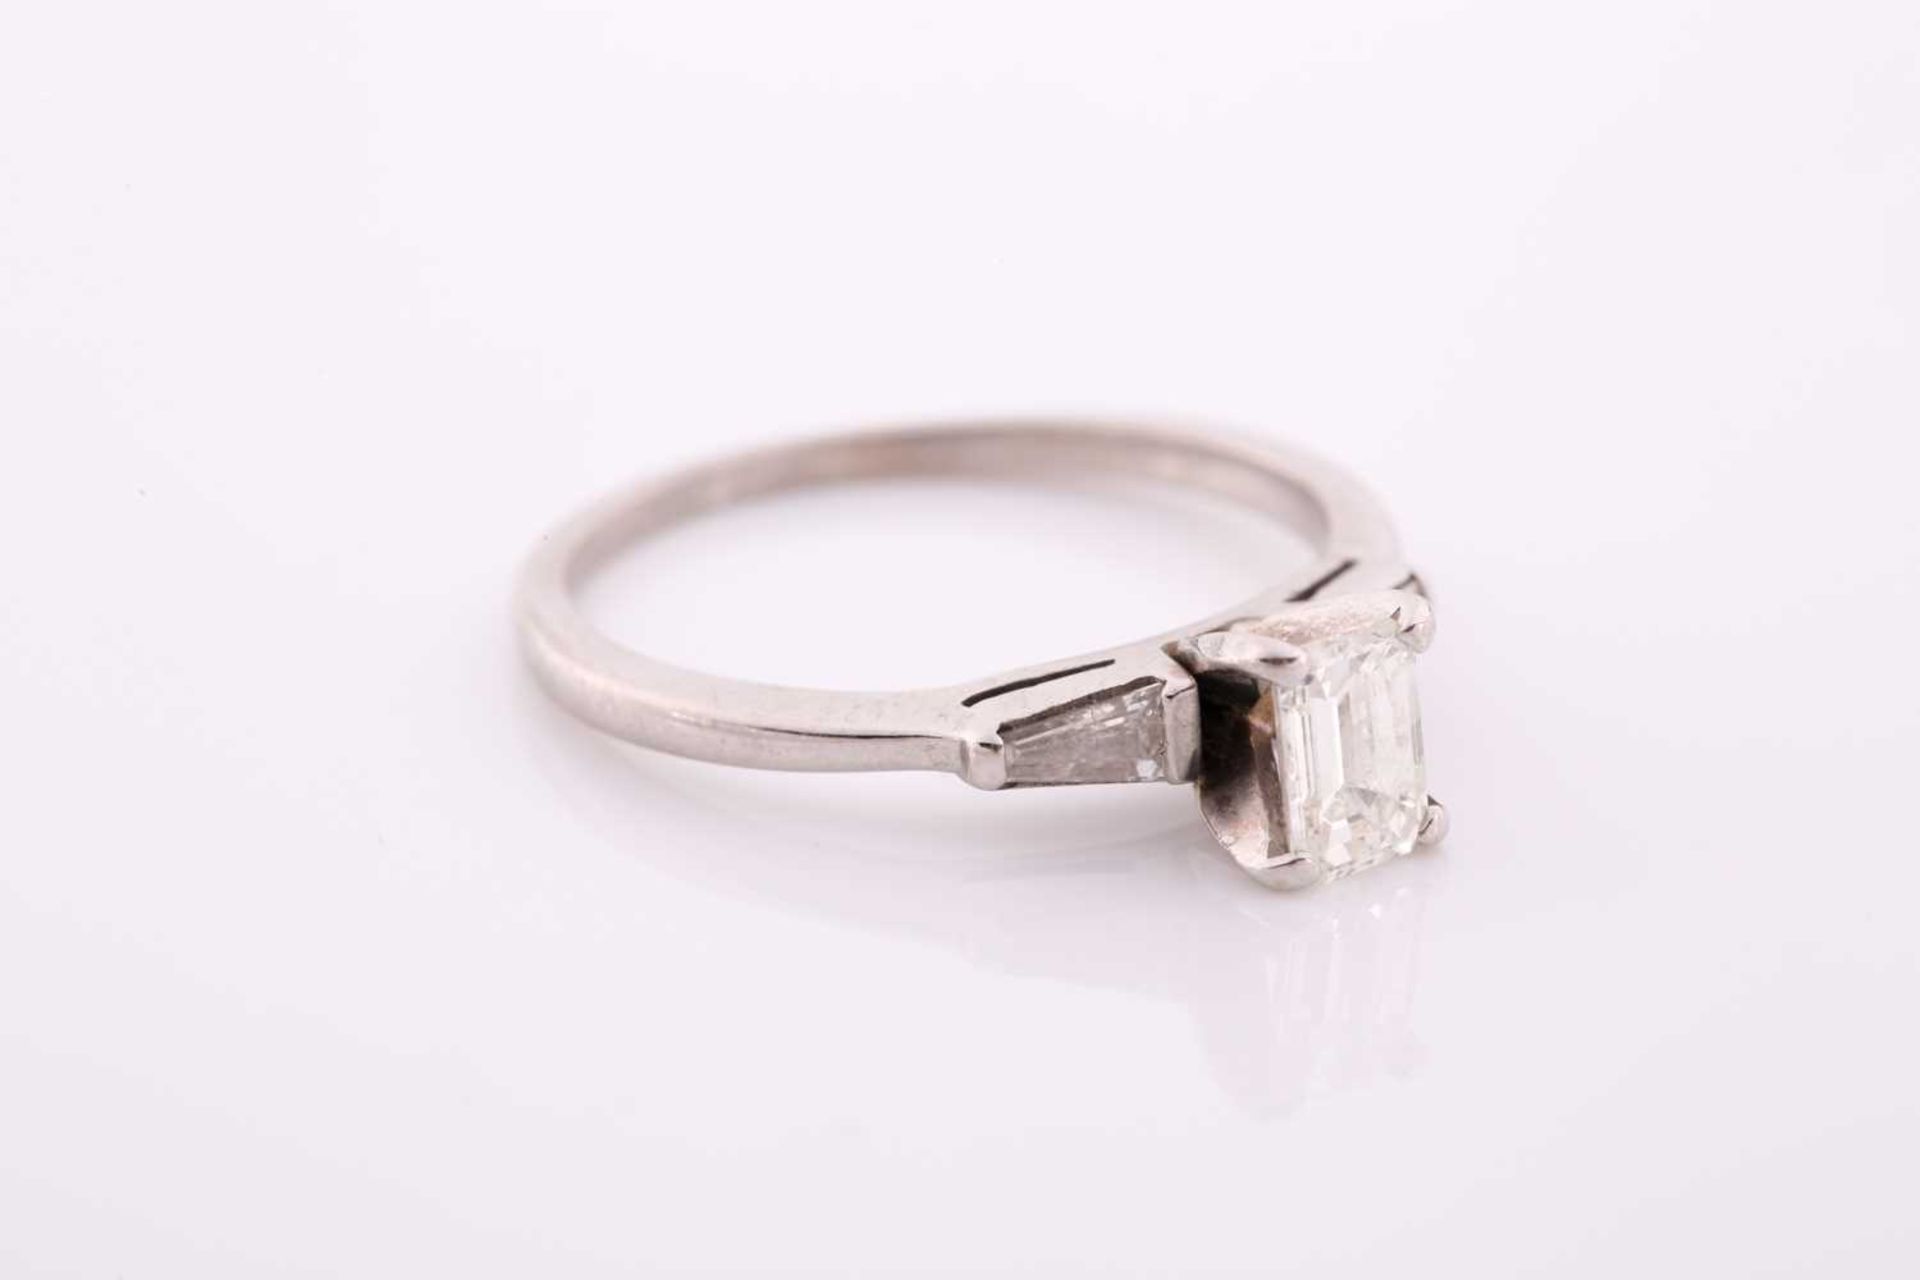 An 18ct white gold and diamond ring, set with an emerald-cut diamond of approximately 0.60 carats, - Image 2 of 4